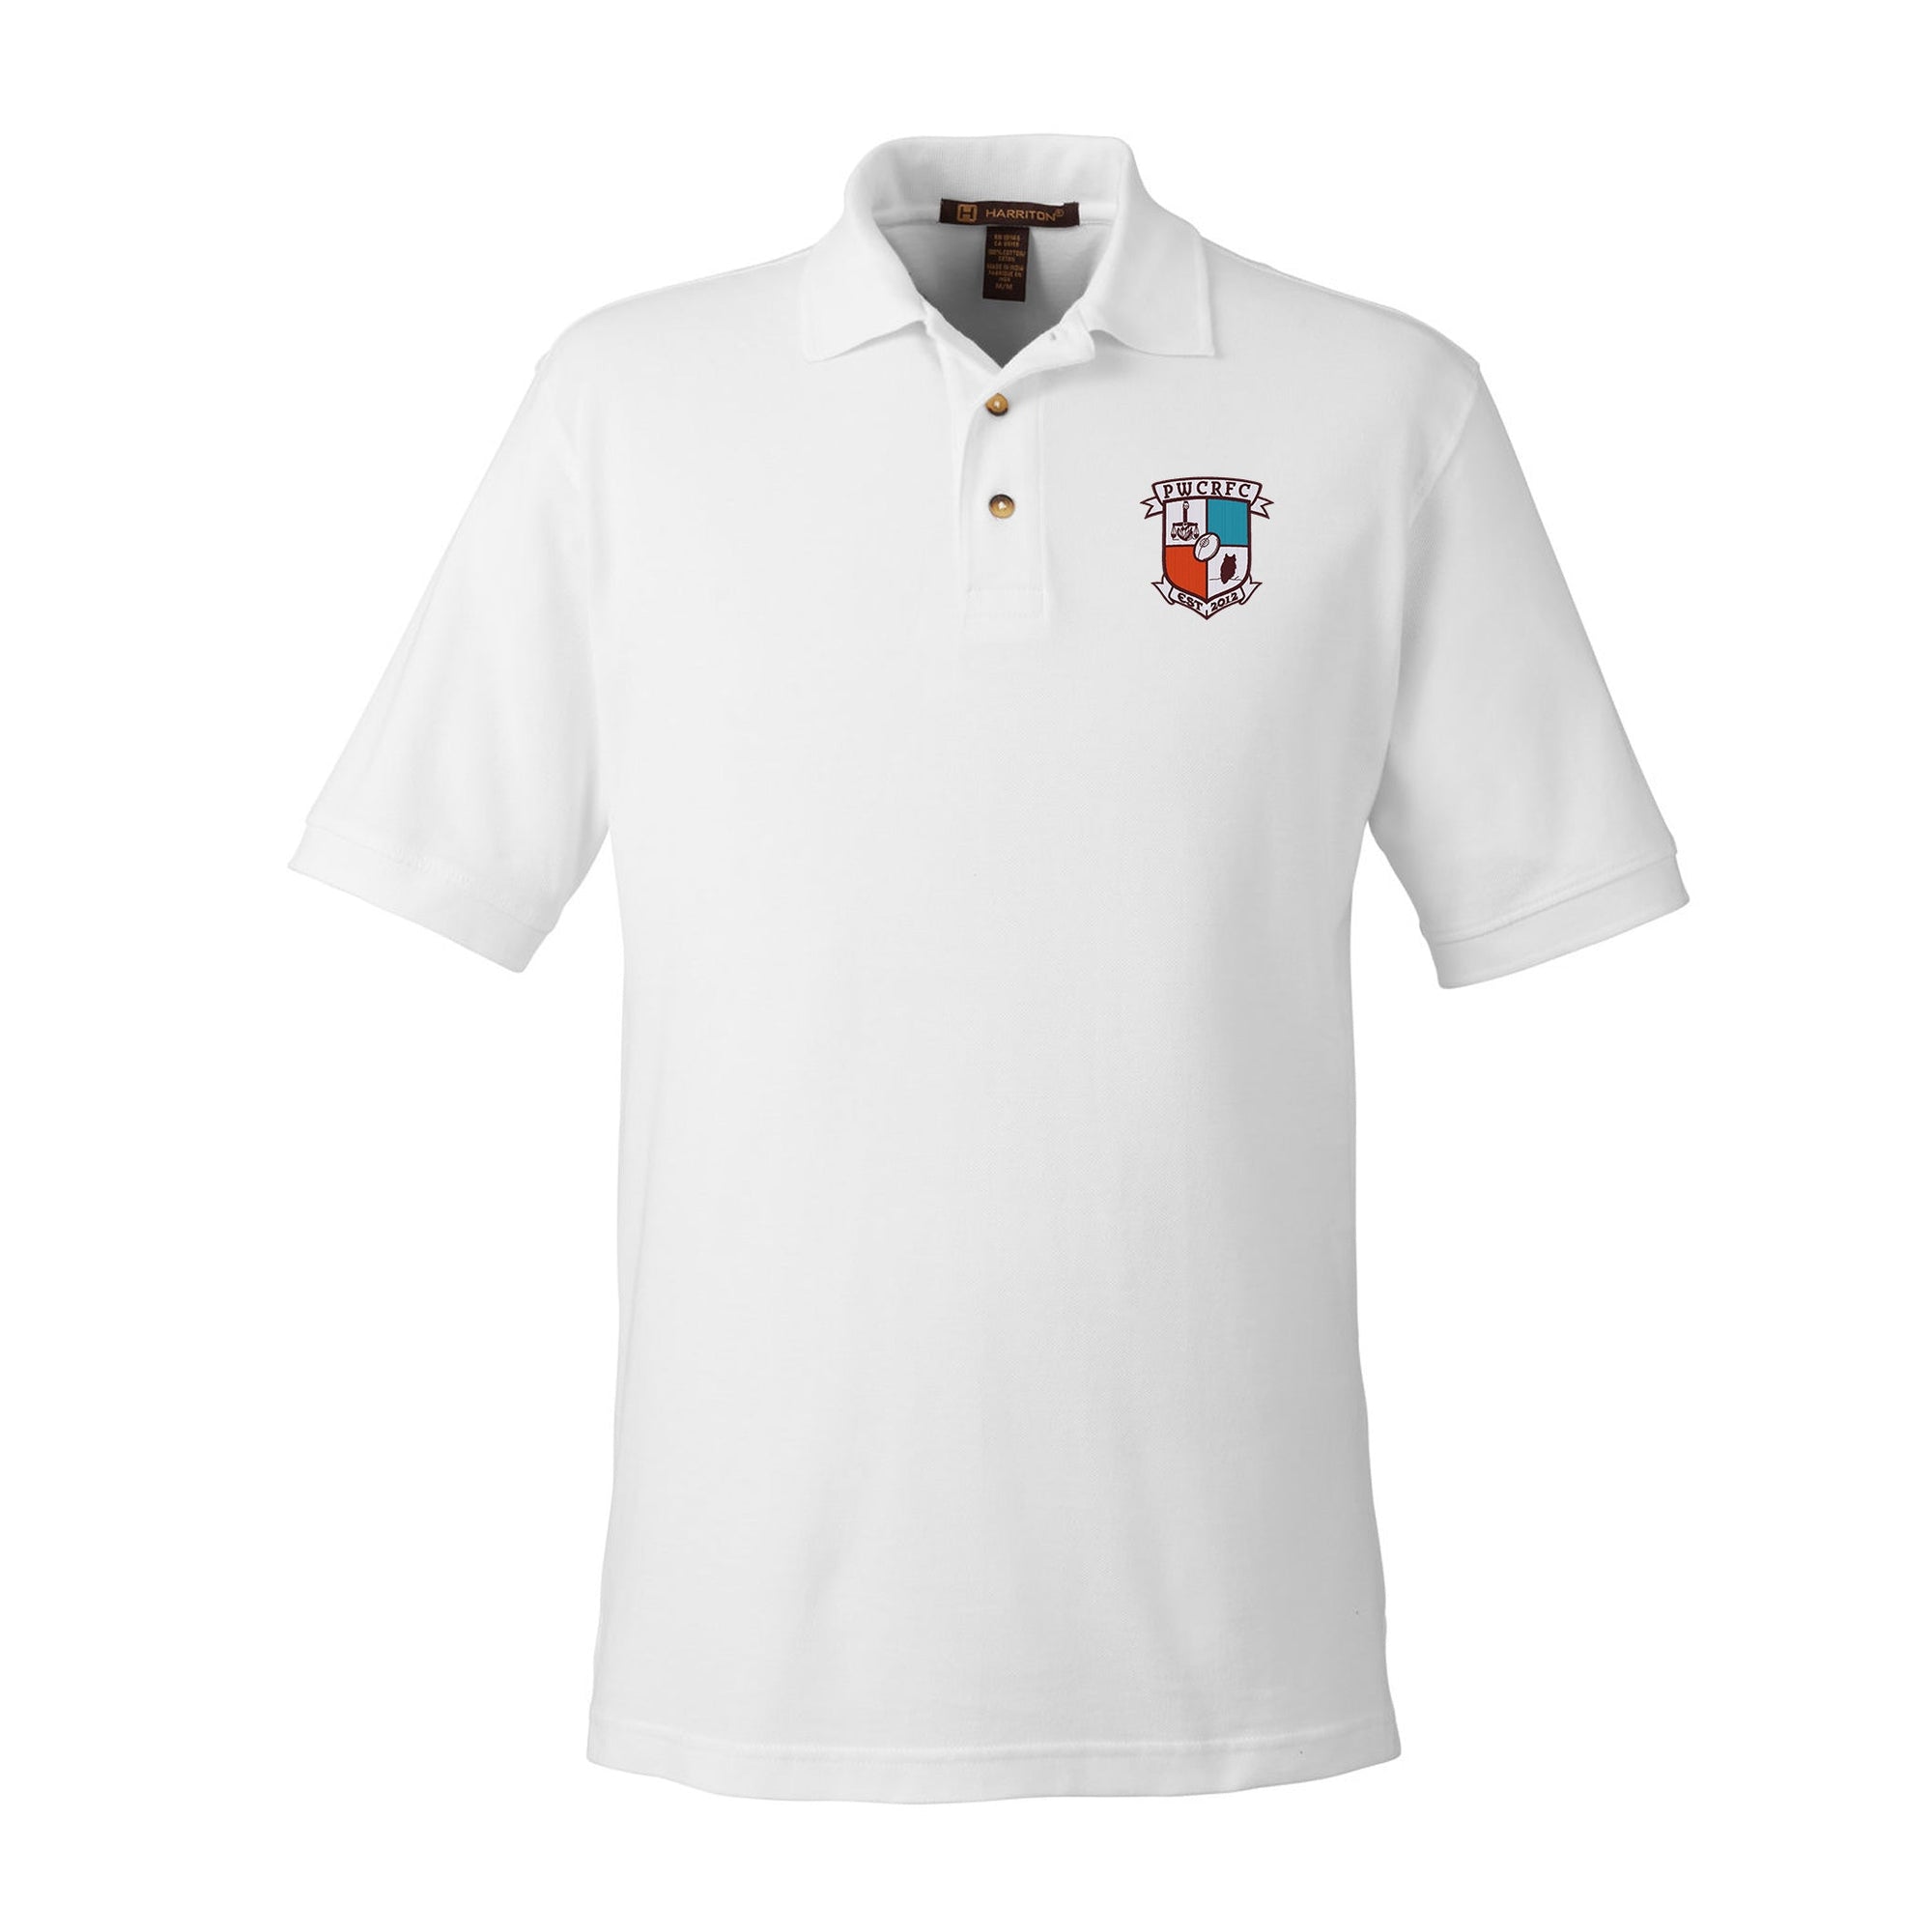 Rugby Imports PWCRFC Owls Cotton Polo